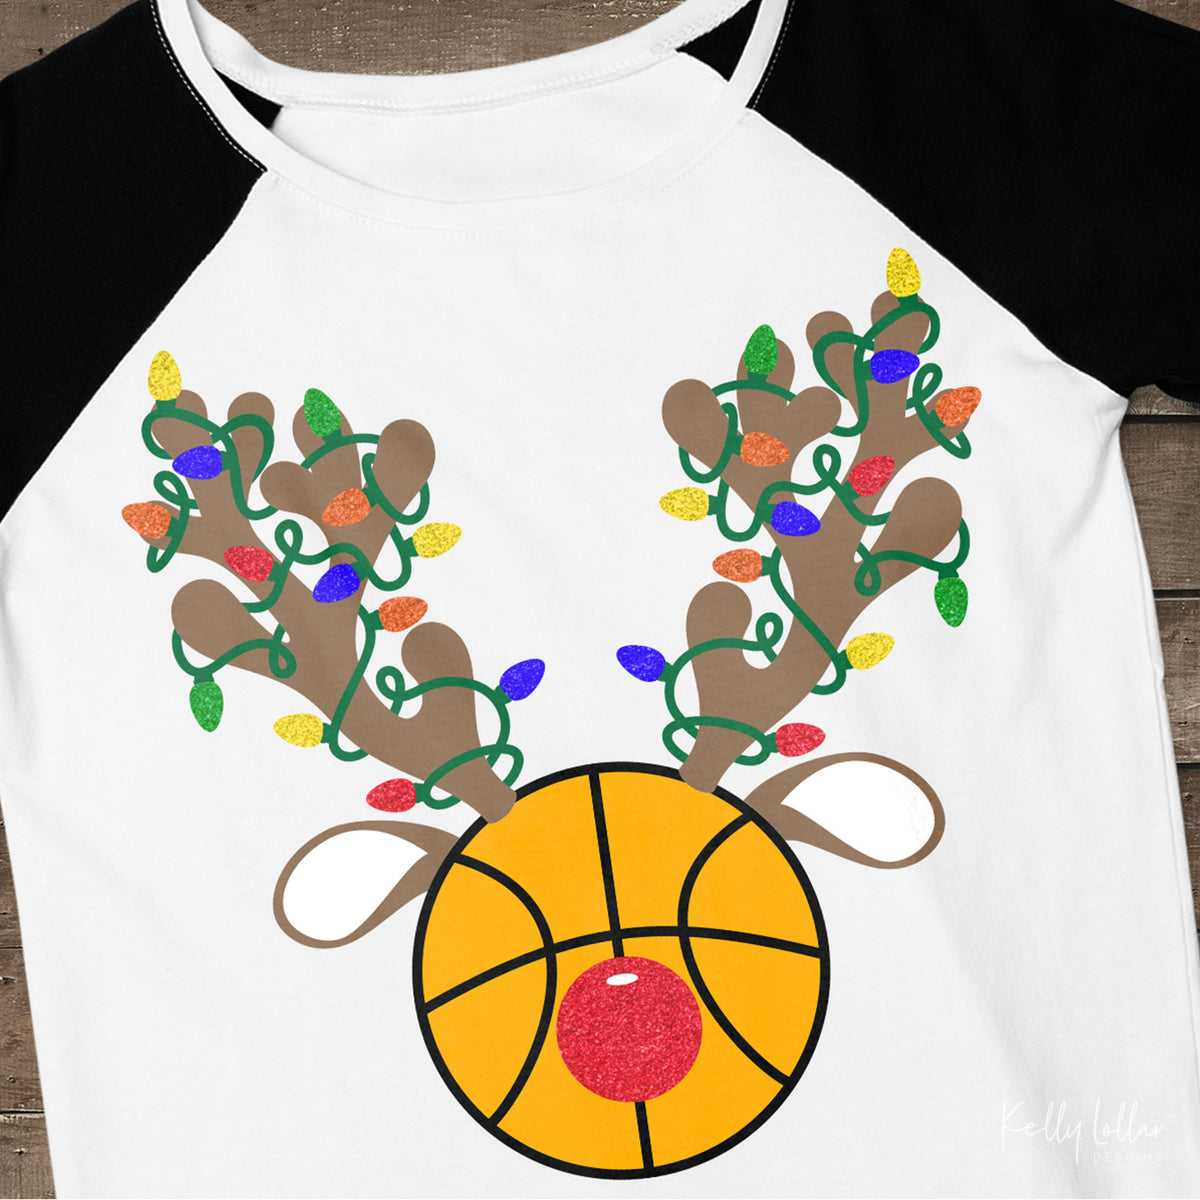 Reindeer Basketball | Christmas Light Wrapped Reindeer Antlers and Ears on a Basketball for Holiday Shirts and Decor | SVG DXF PNG Cut Files